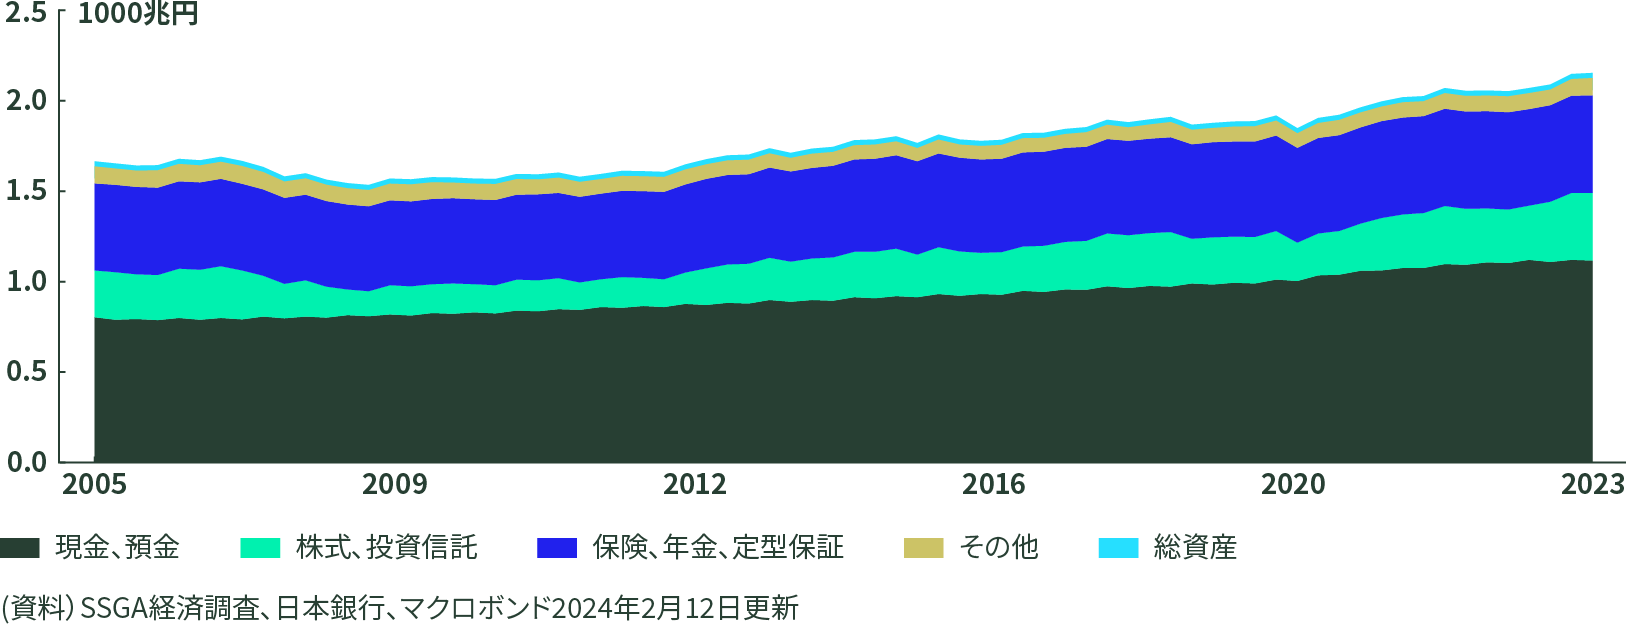 Figure 2: High Share of Deposits in Japanese Household Assets